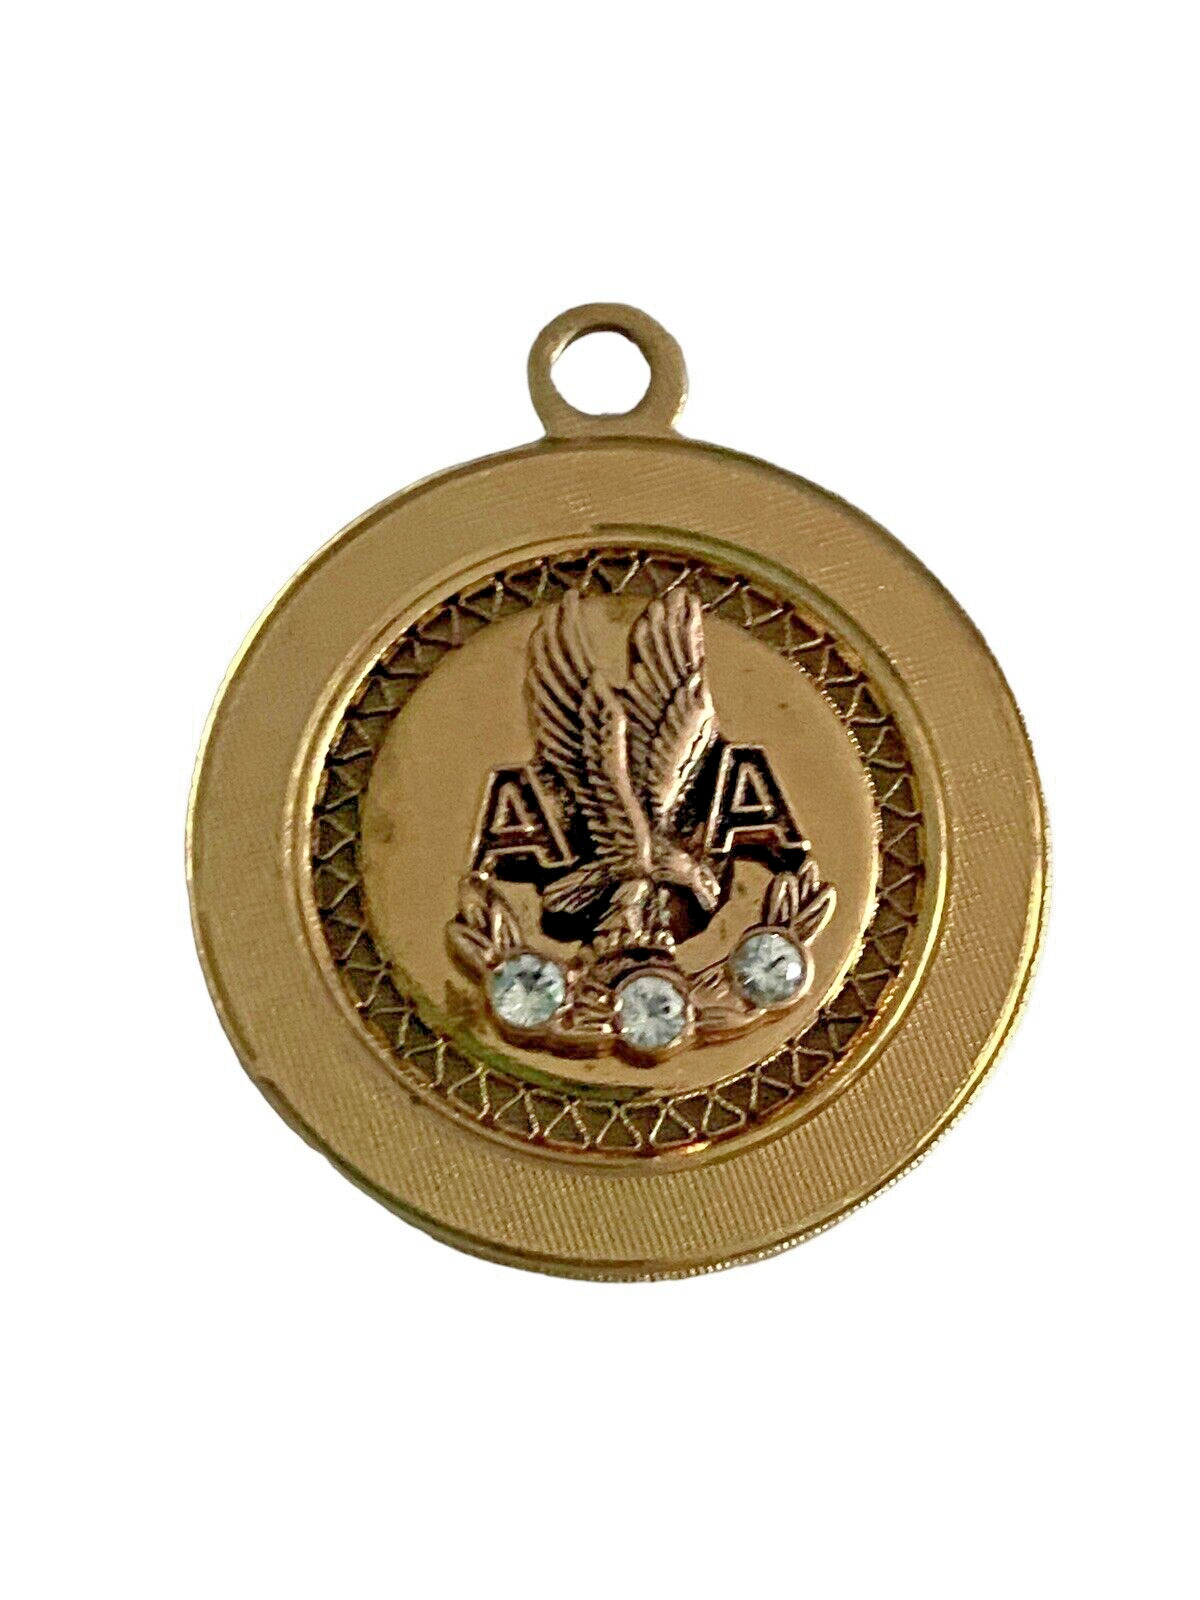 American Airlines Vintage Gold Plated Charm/Pendant 30 Year Service 3 Stones